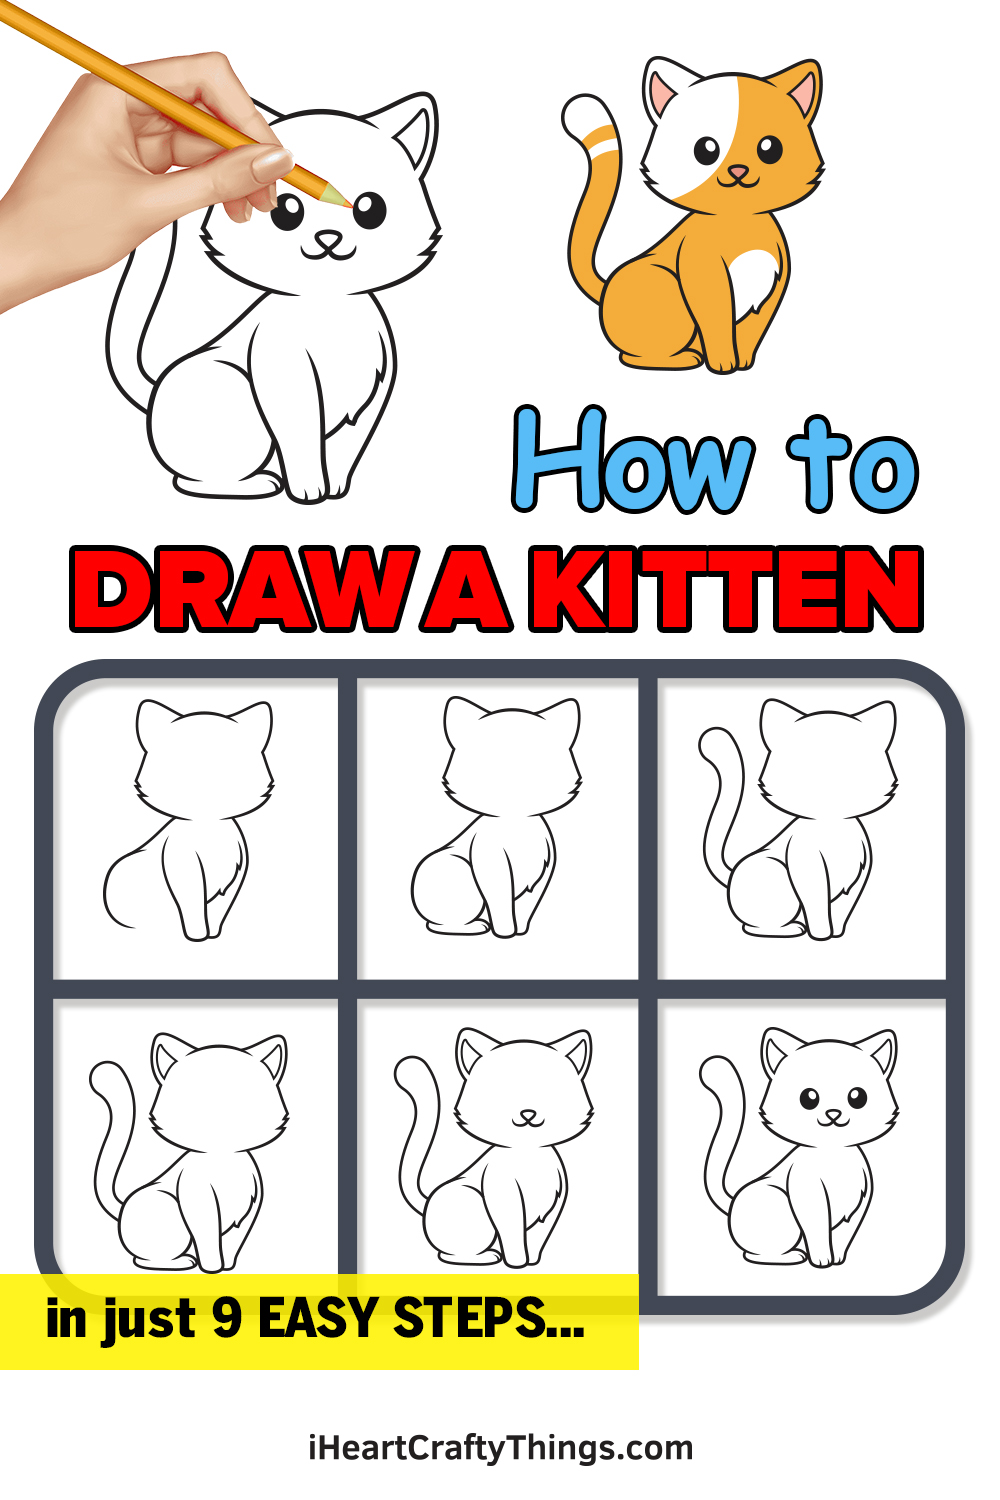 How to Draw a Kitten in 9 Easy Steps